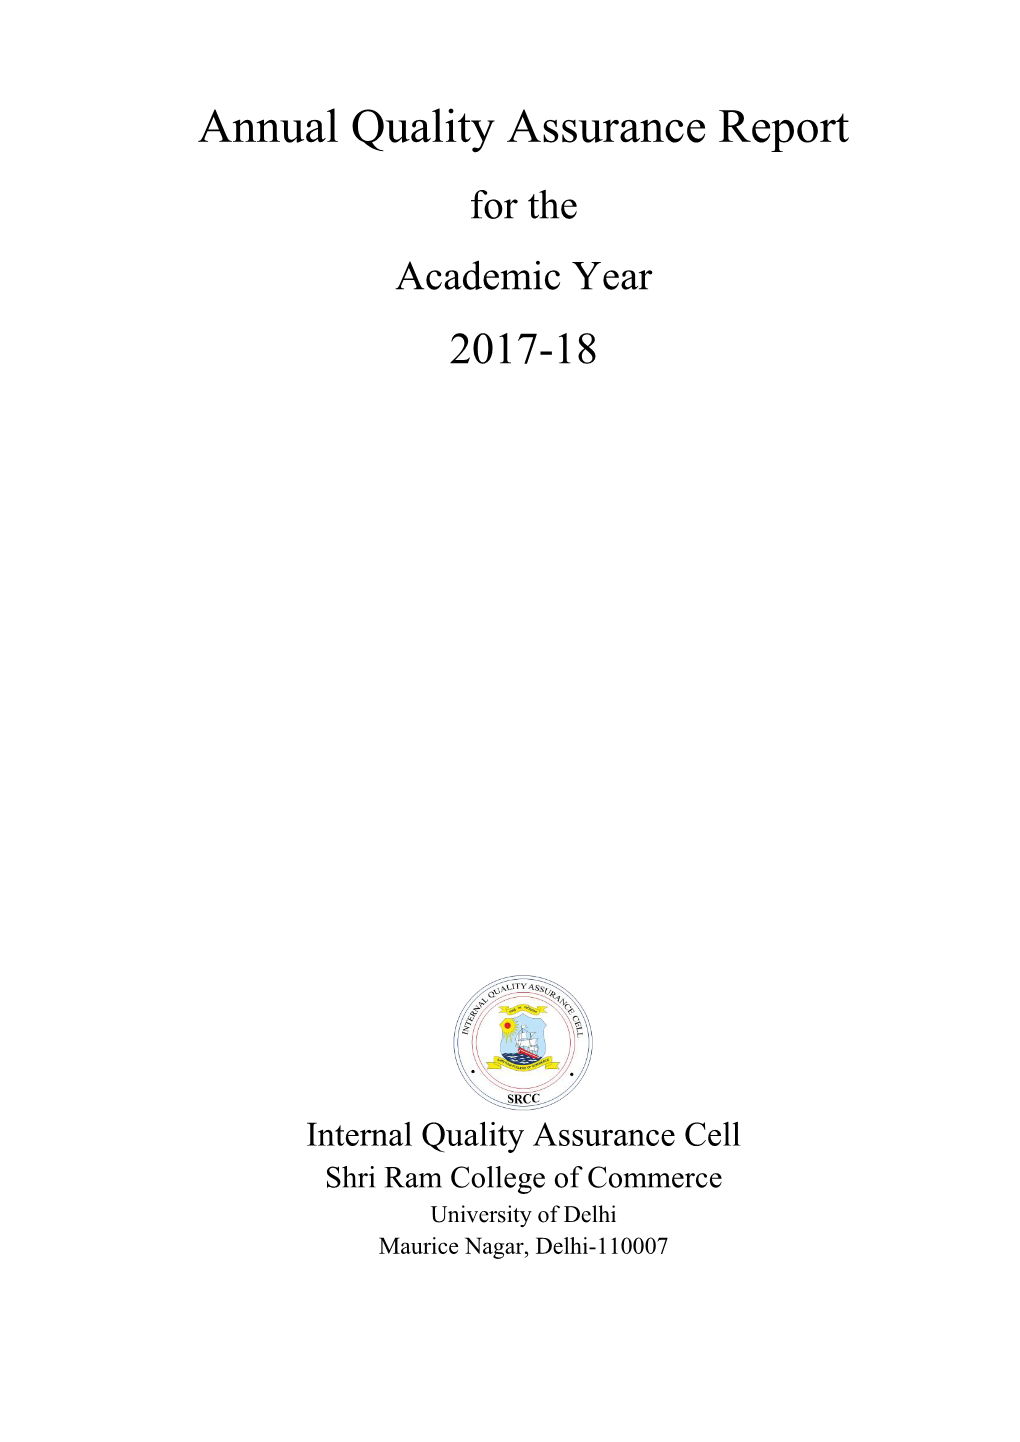 Annual Quality Assurance Report for the Academic Year 2017-18